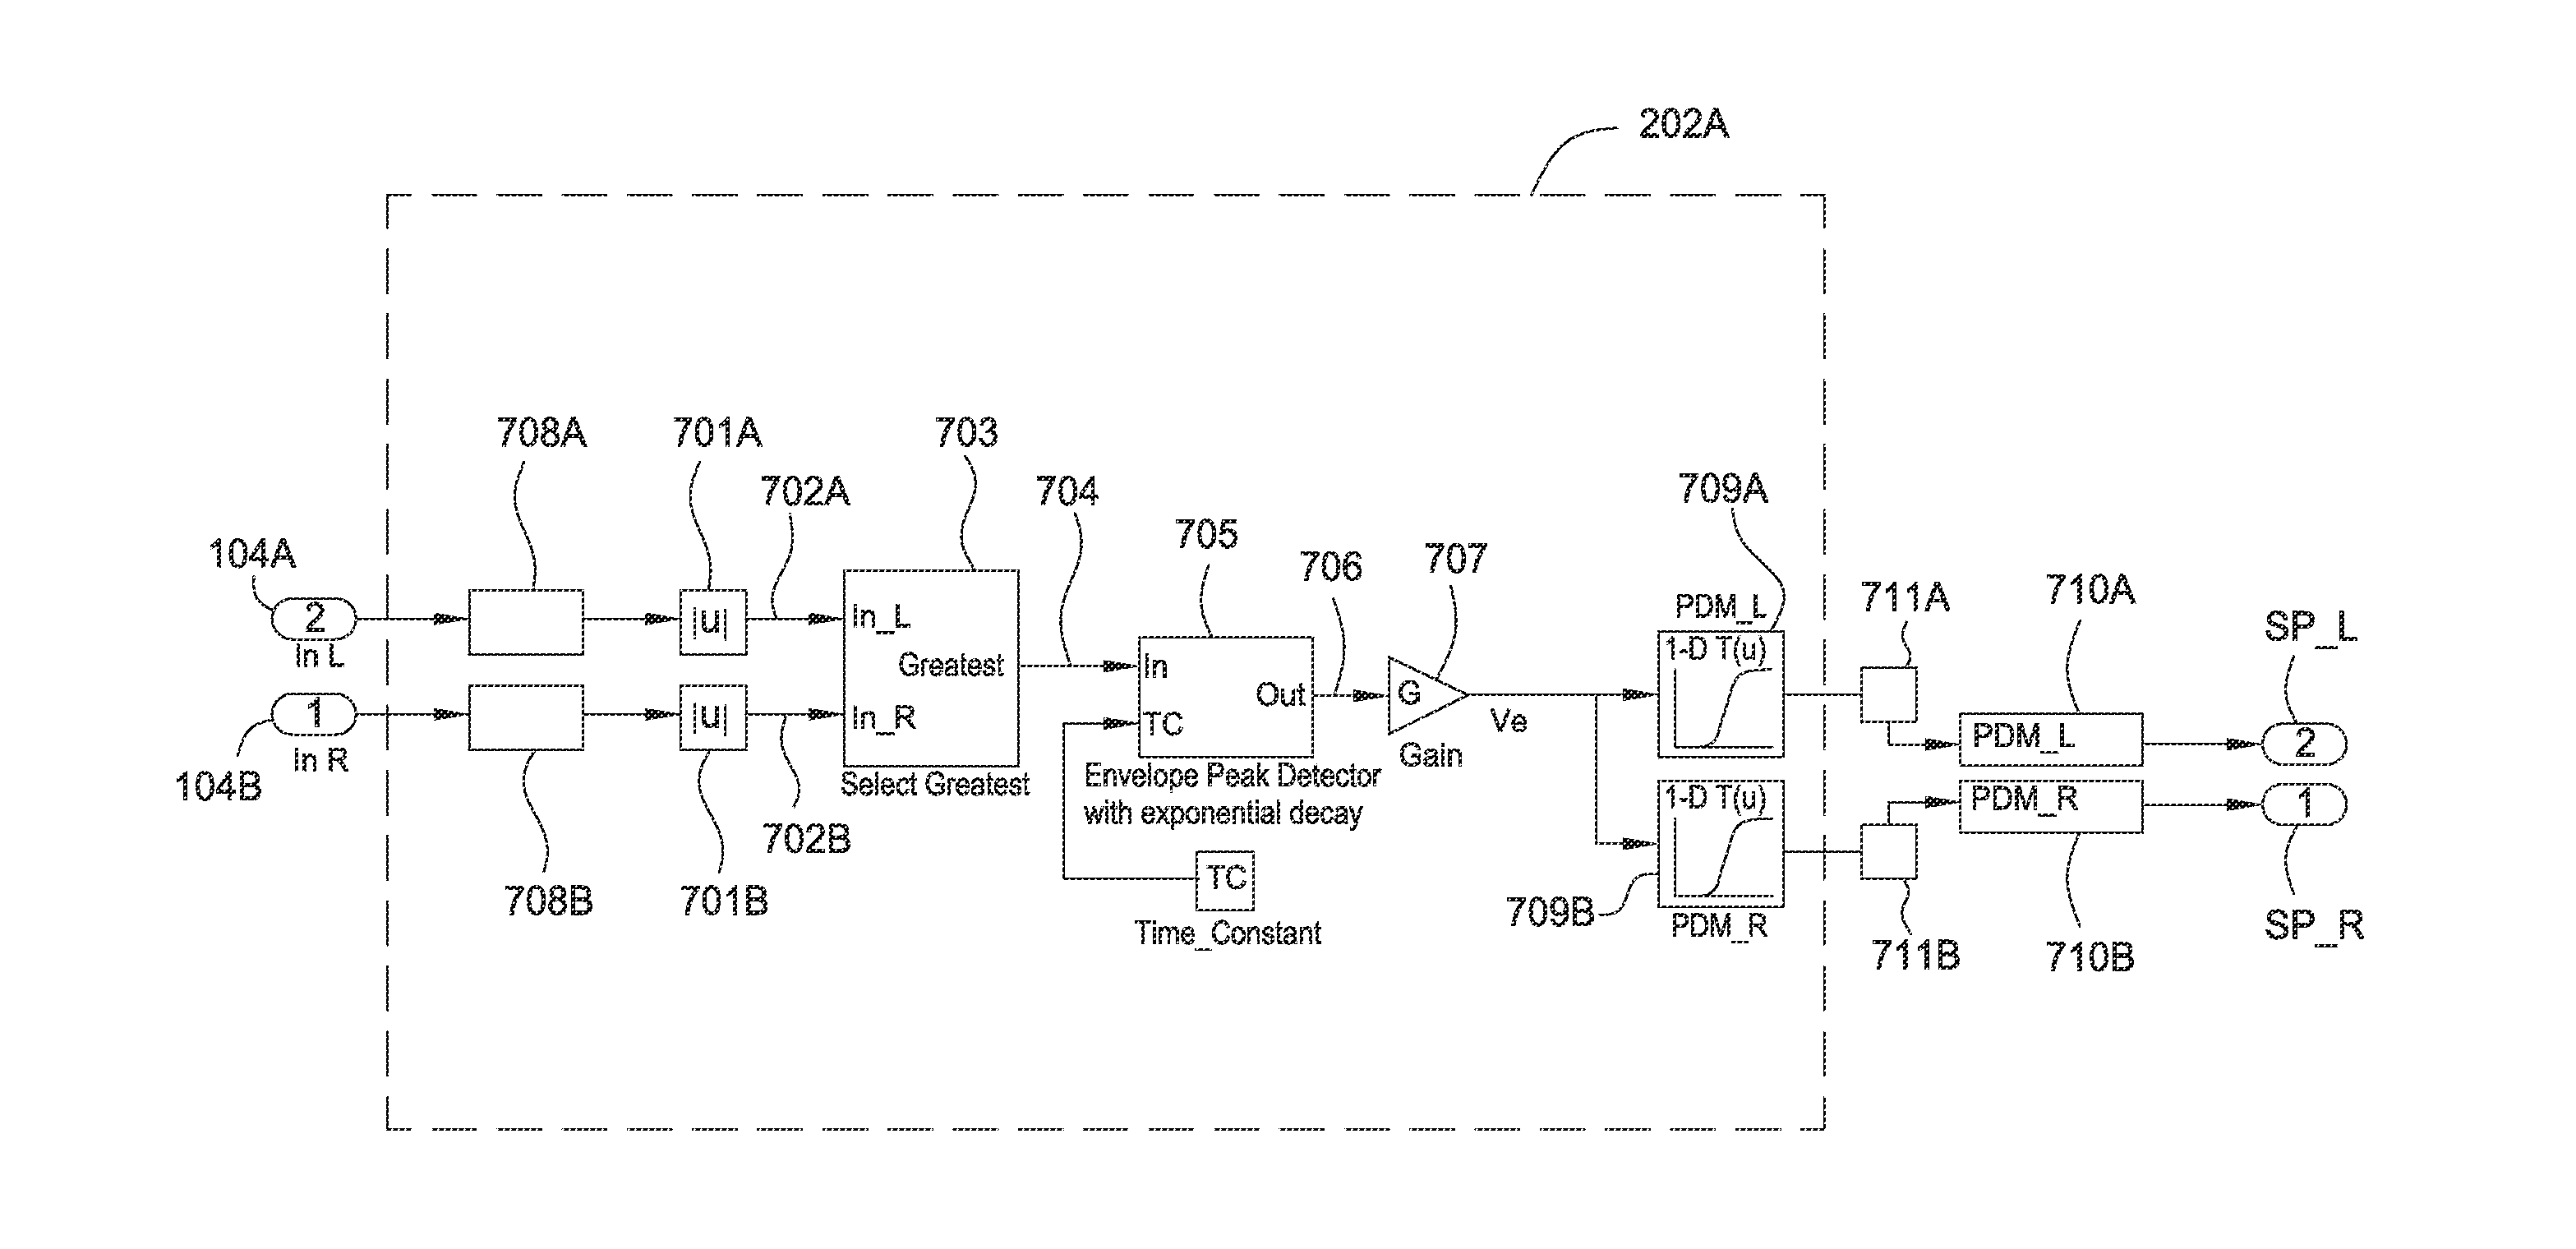 Audio delivery system having an improved efficiency and extended operation time between recharges or battery replacements